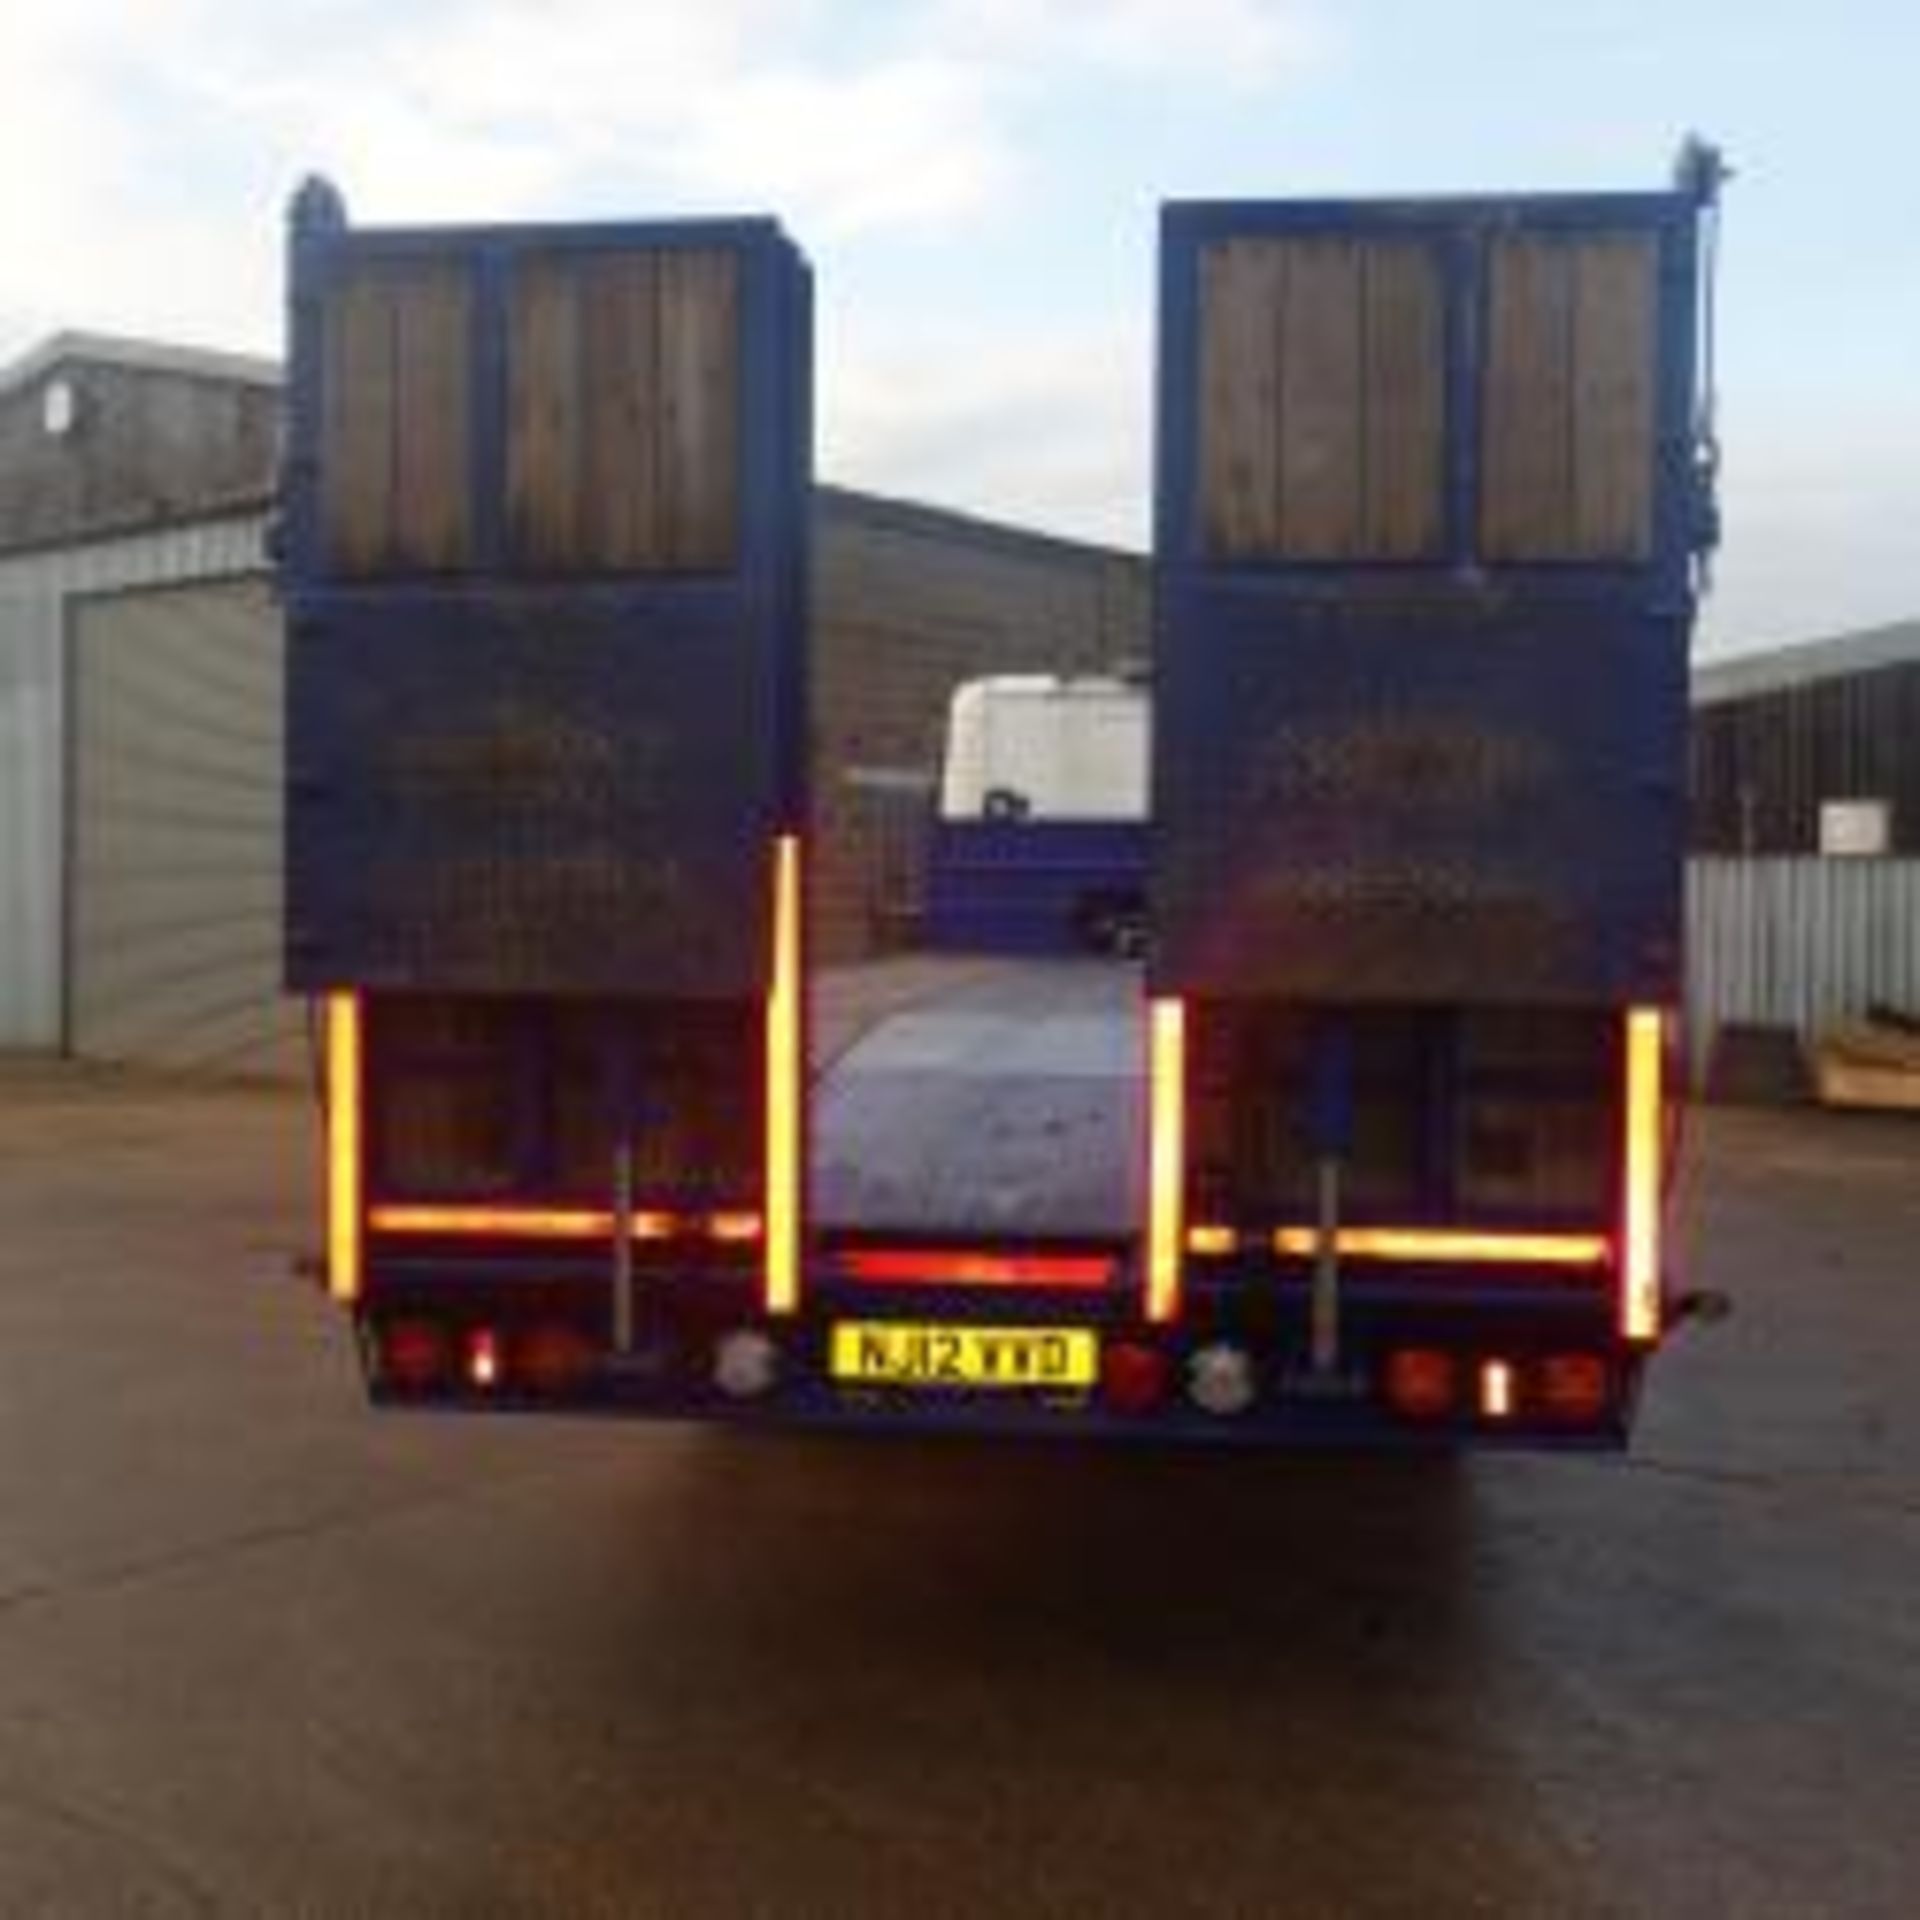 2012 Scania Plant Lorry Rear Steer And Lift Axle. - Image 4 of 13